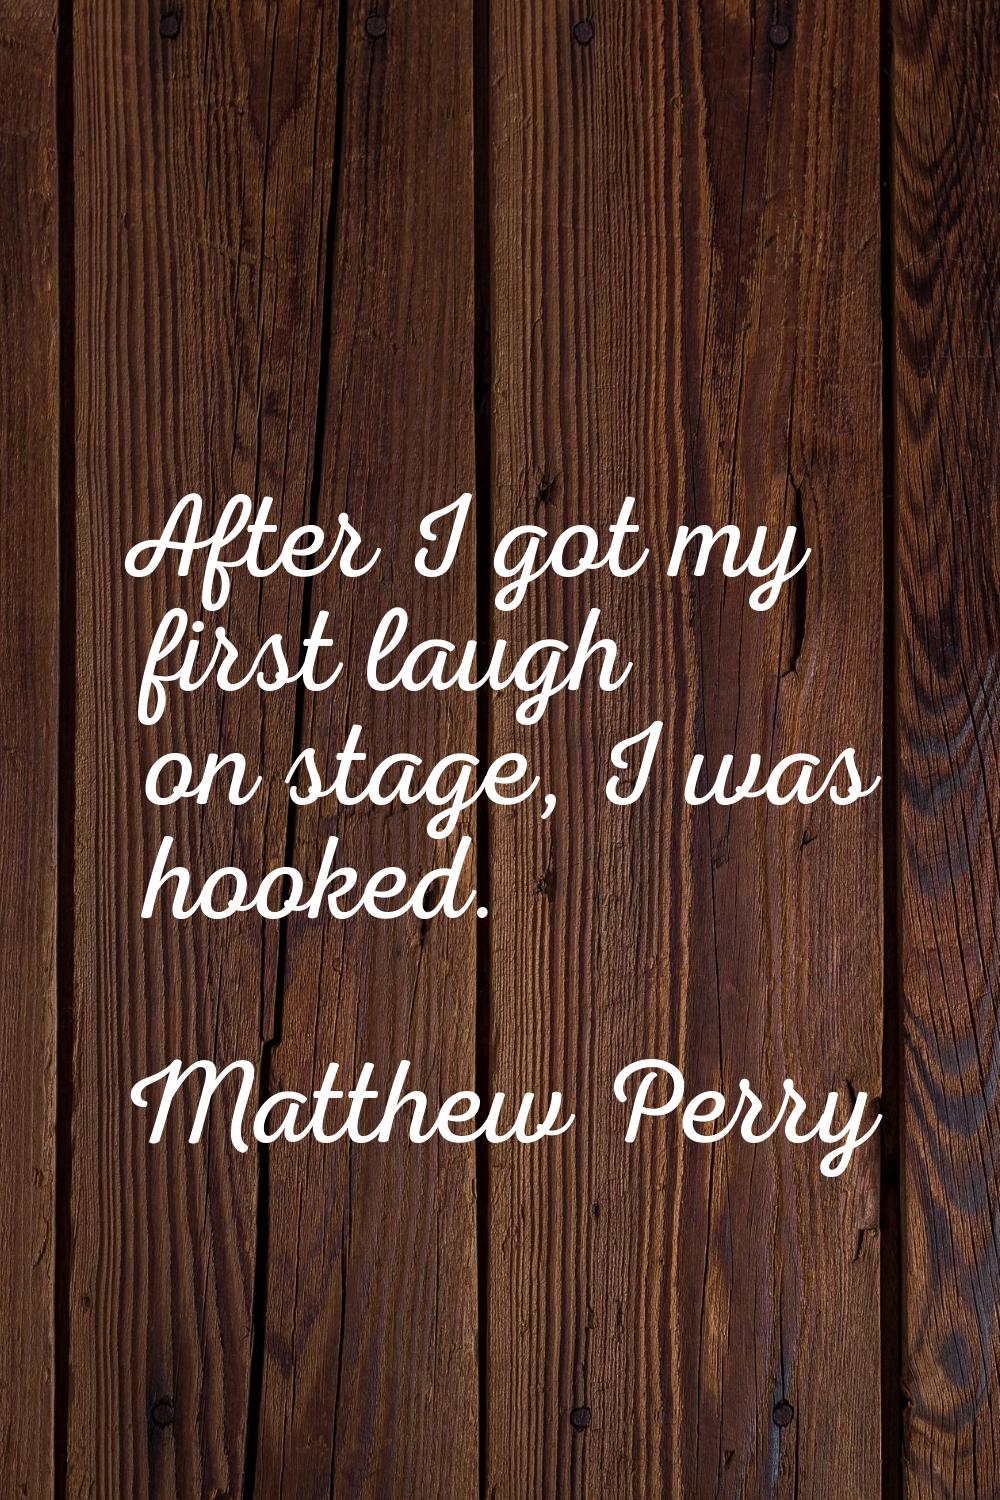 After I got my first laugh on stage, I was hooked.